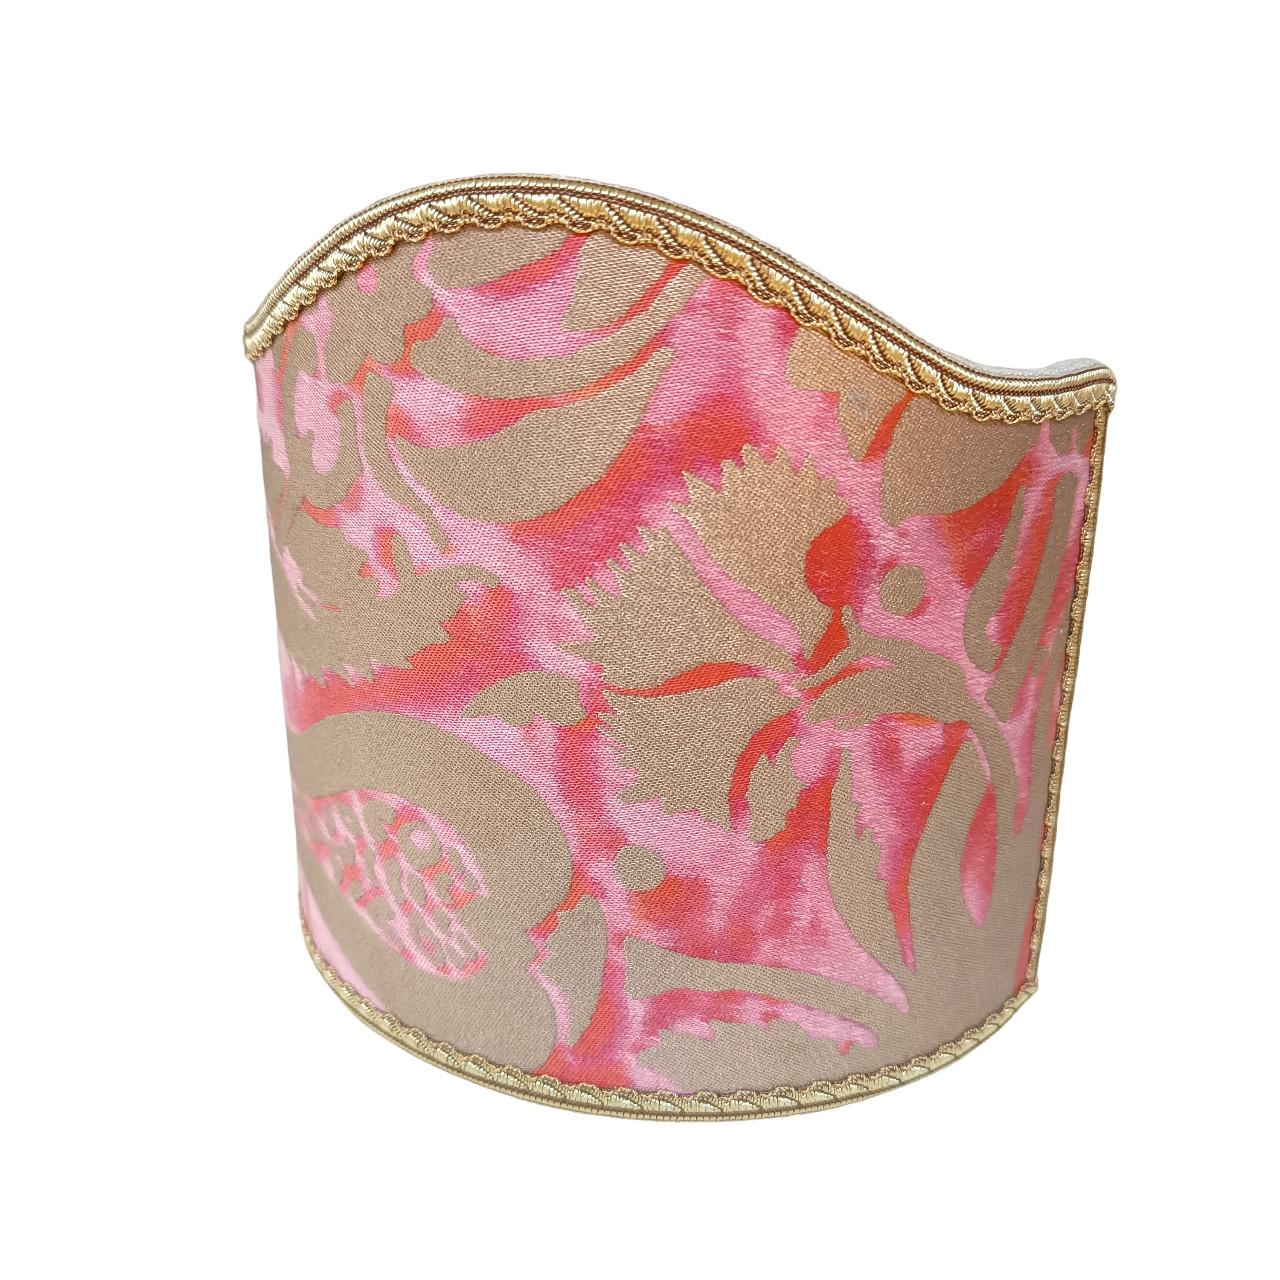 Paar Clip on Sconce Schirme Fortuny Fabric Coral Haze & Silvery Gold Pomegranate im Angebot 3